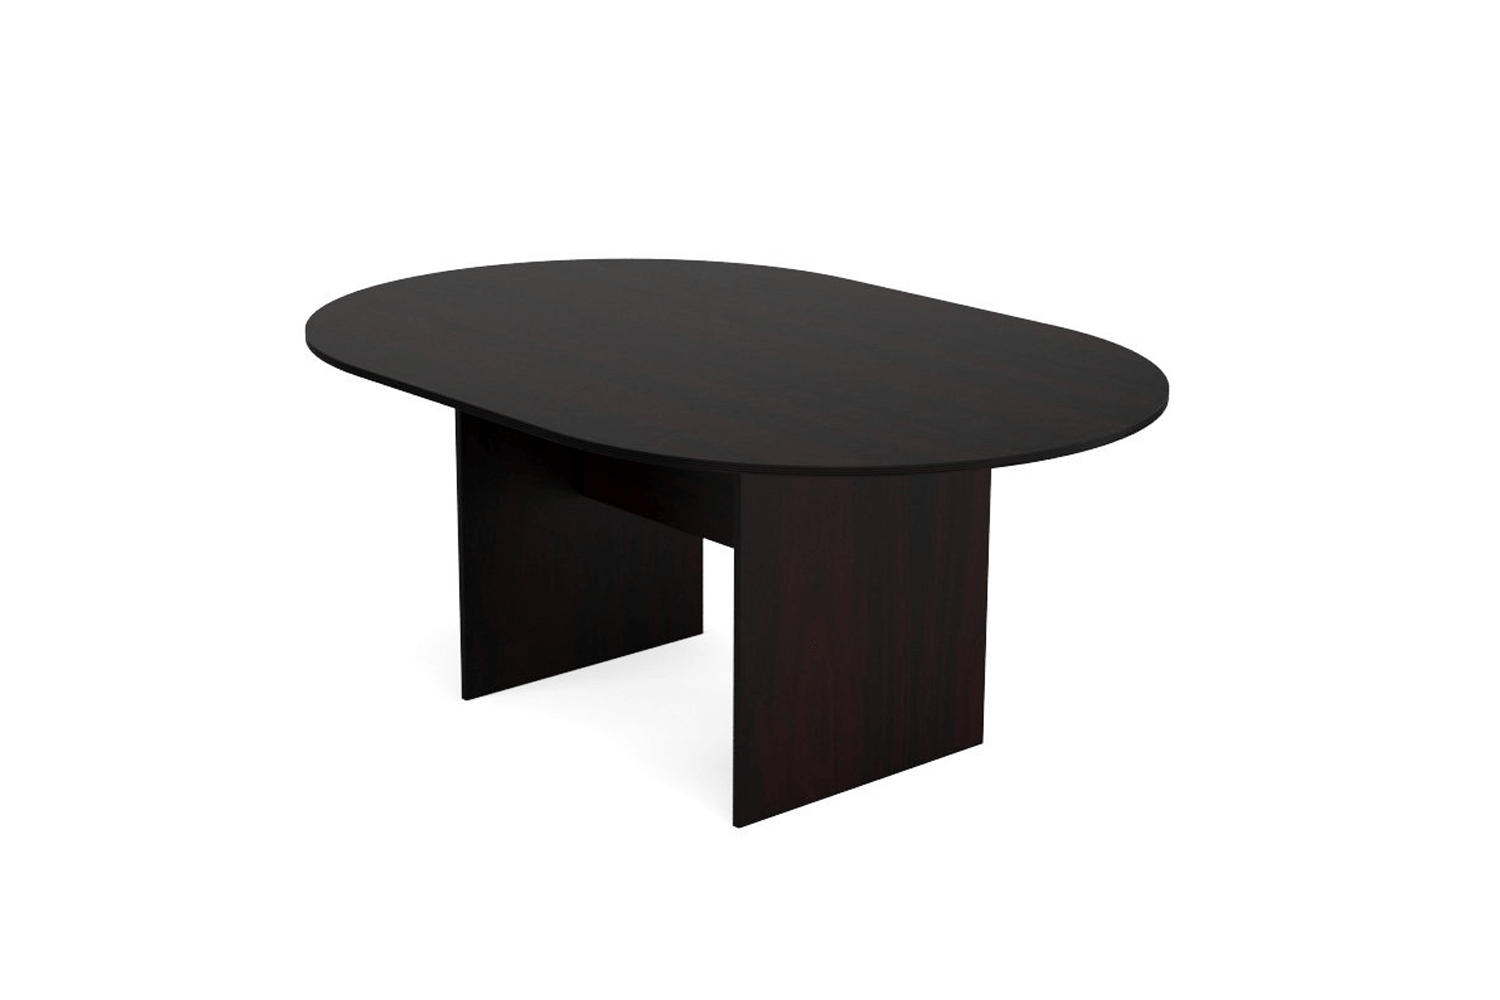 Product-Kai-Espresso-71-Racetrack-Conference-Table